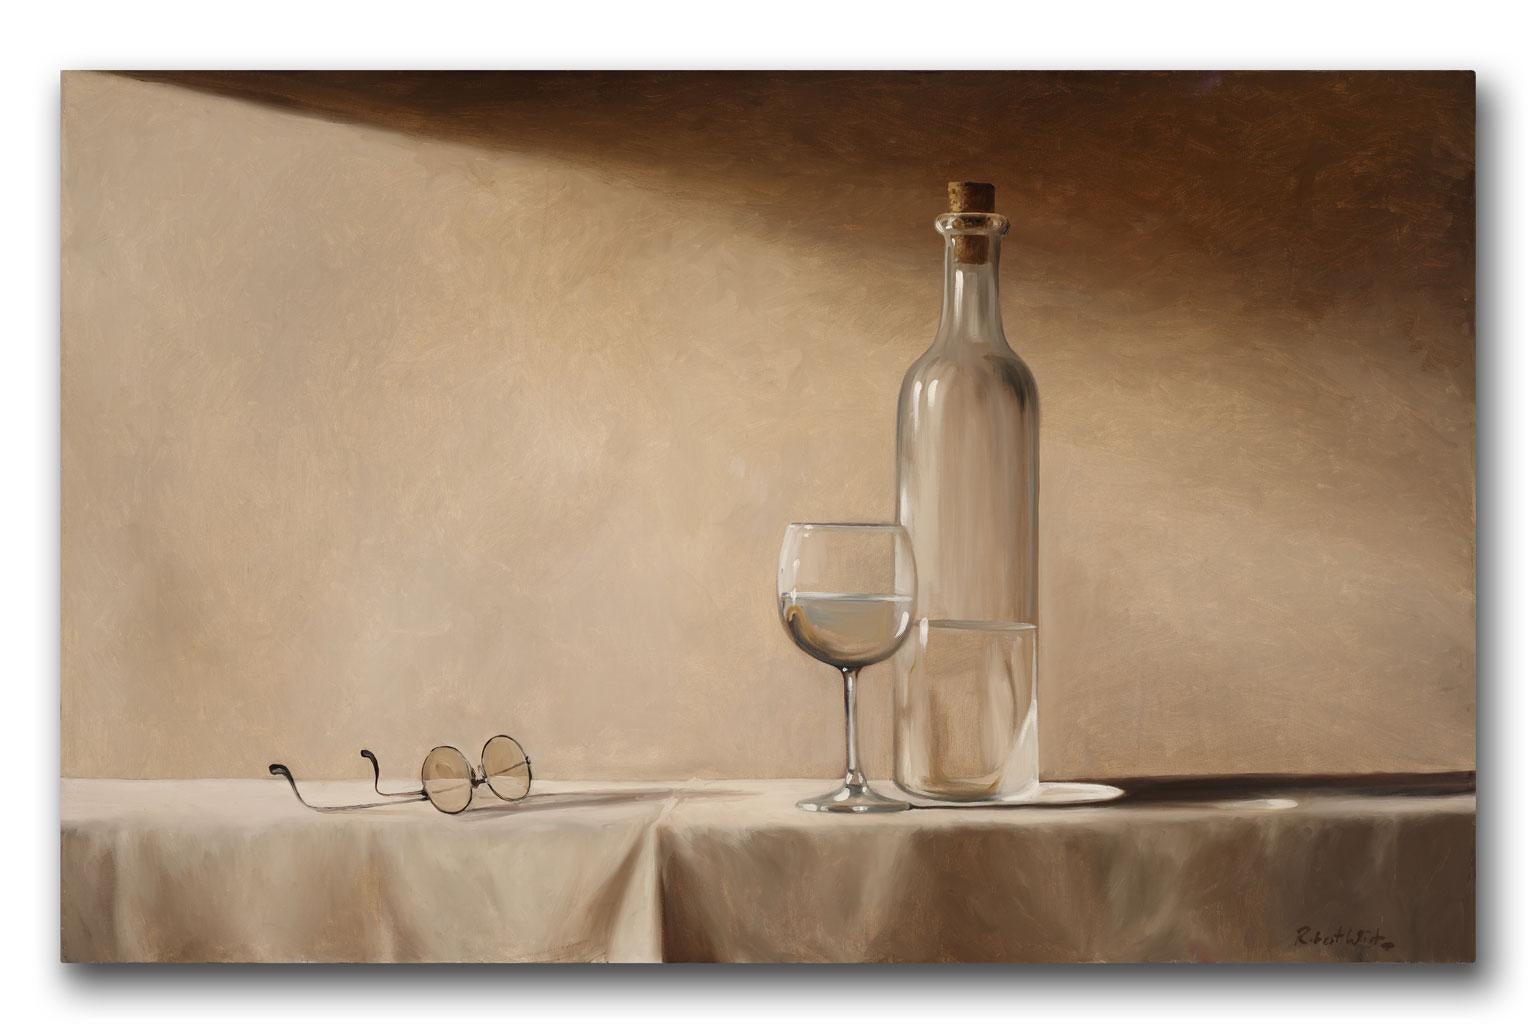 [Glasses] Large Original Oil Painting by Robert White, Frameless Display - Brown Interior Painting by Robert Kenneth White